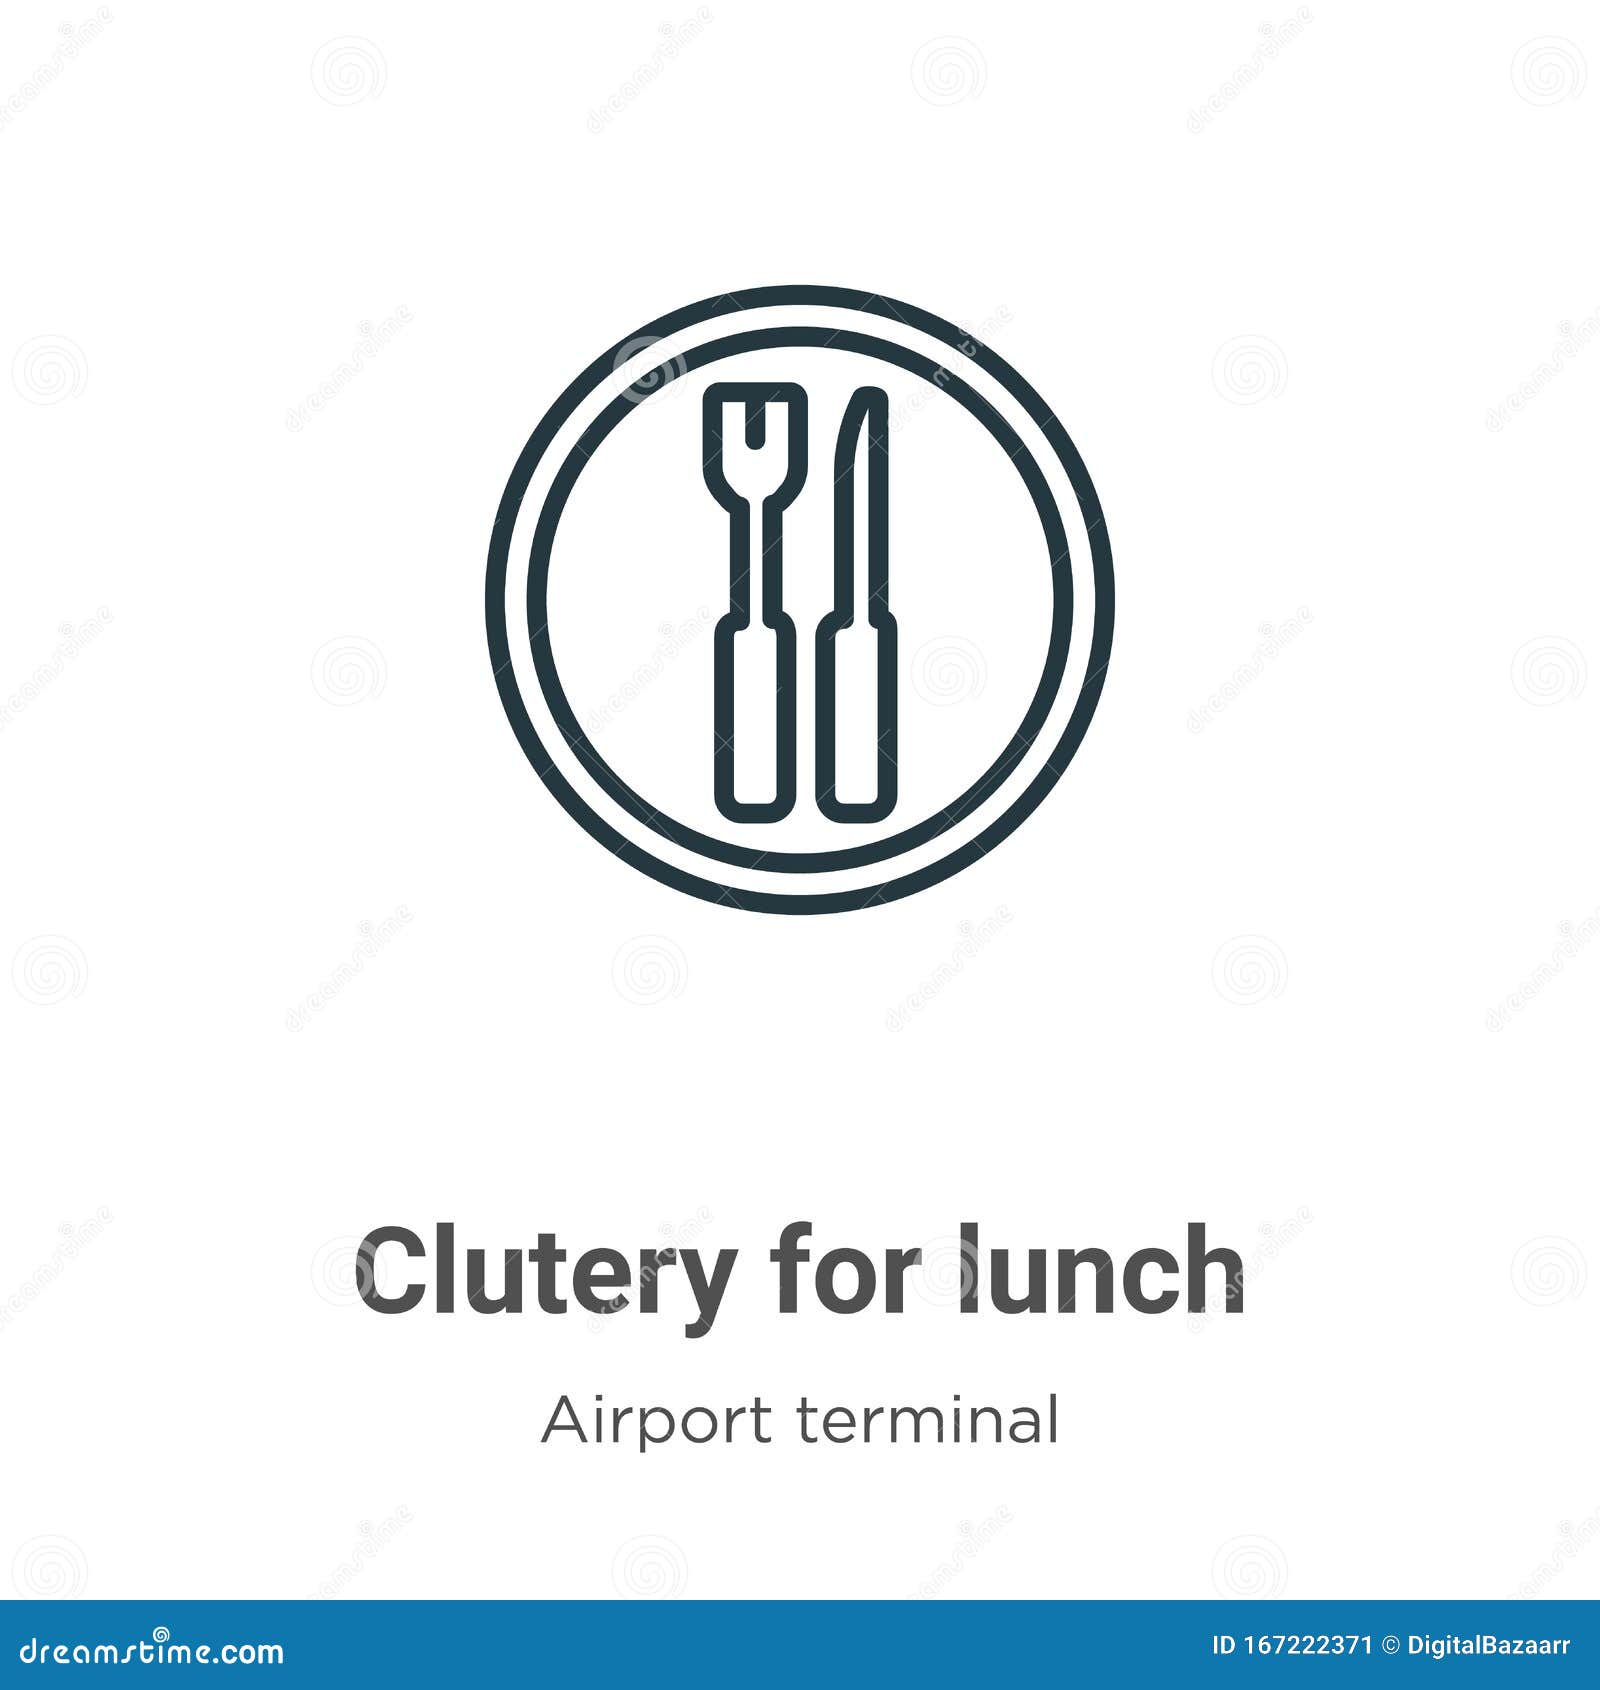 clutery for lunch outline  icon. thin line black clutery for lunch icon, flat  simple   from